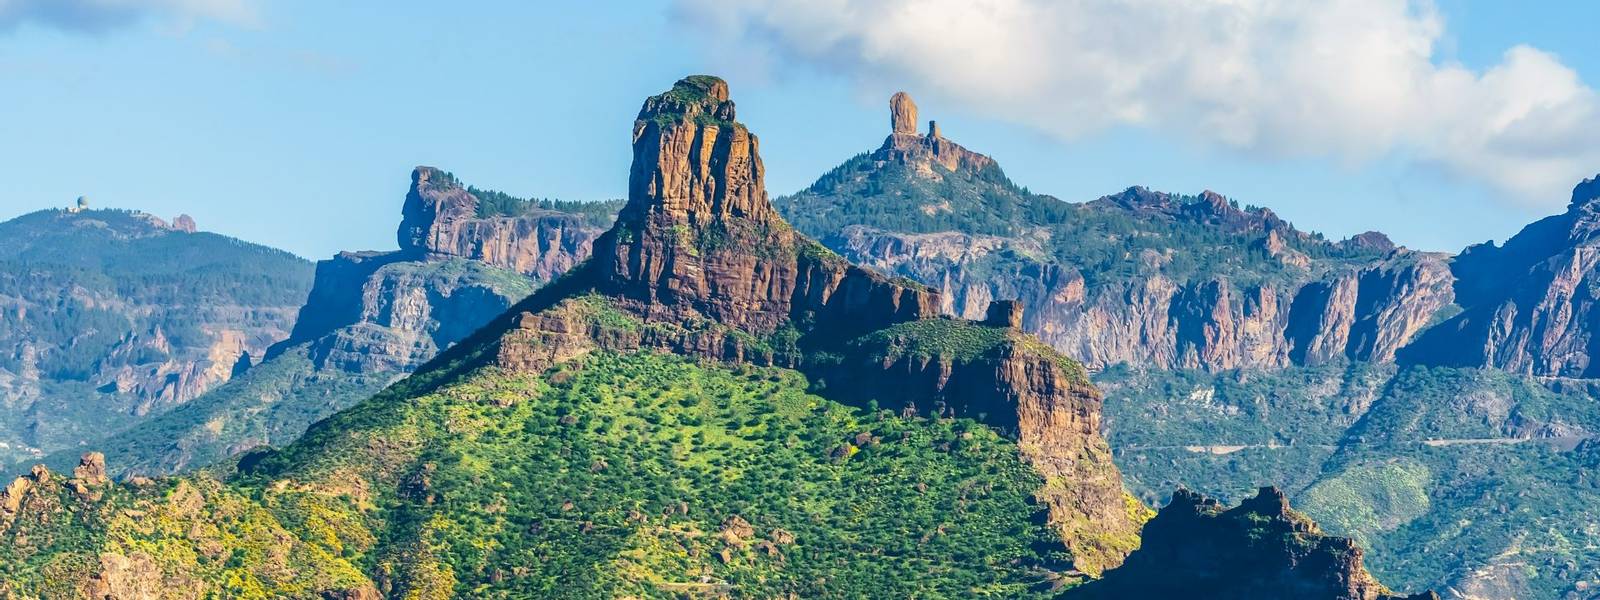 Landscape with Roque Bentayga and Roque Nublo in the background, Gran Canaria, Canary Islands, Spain